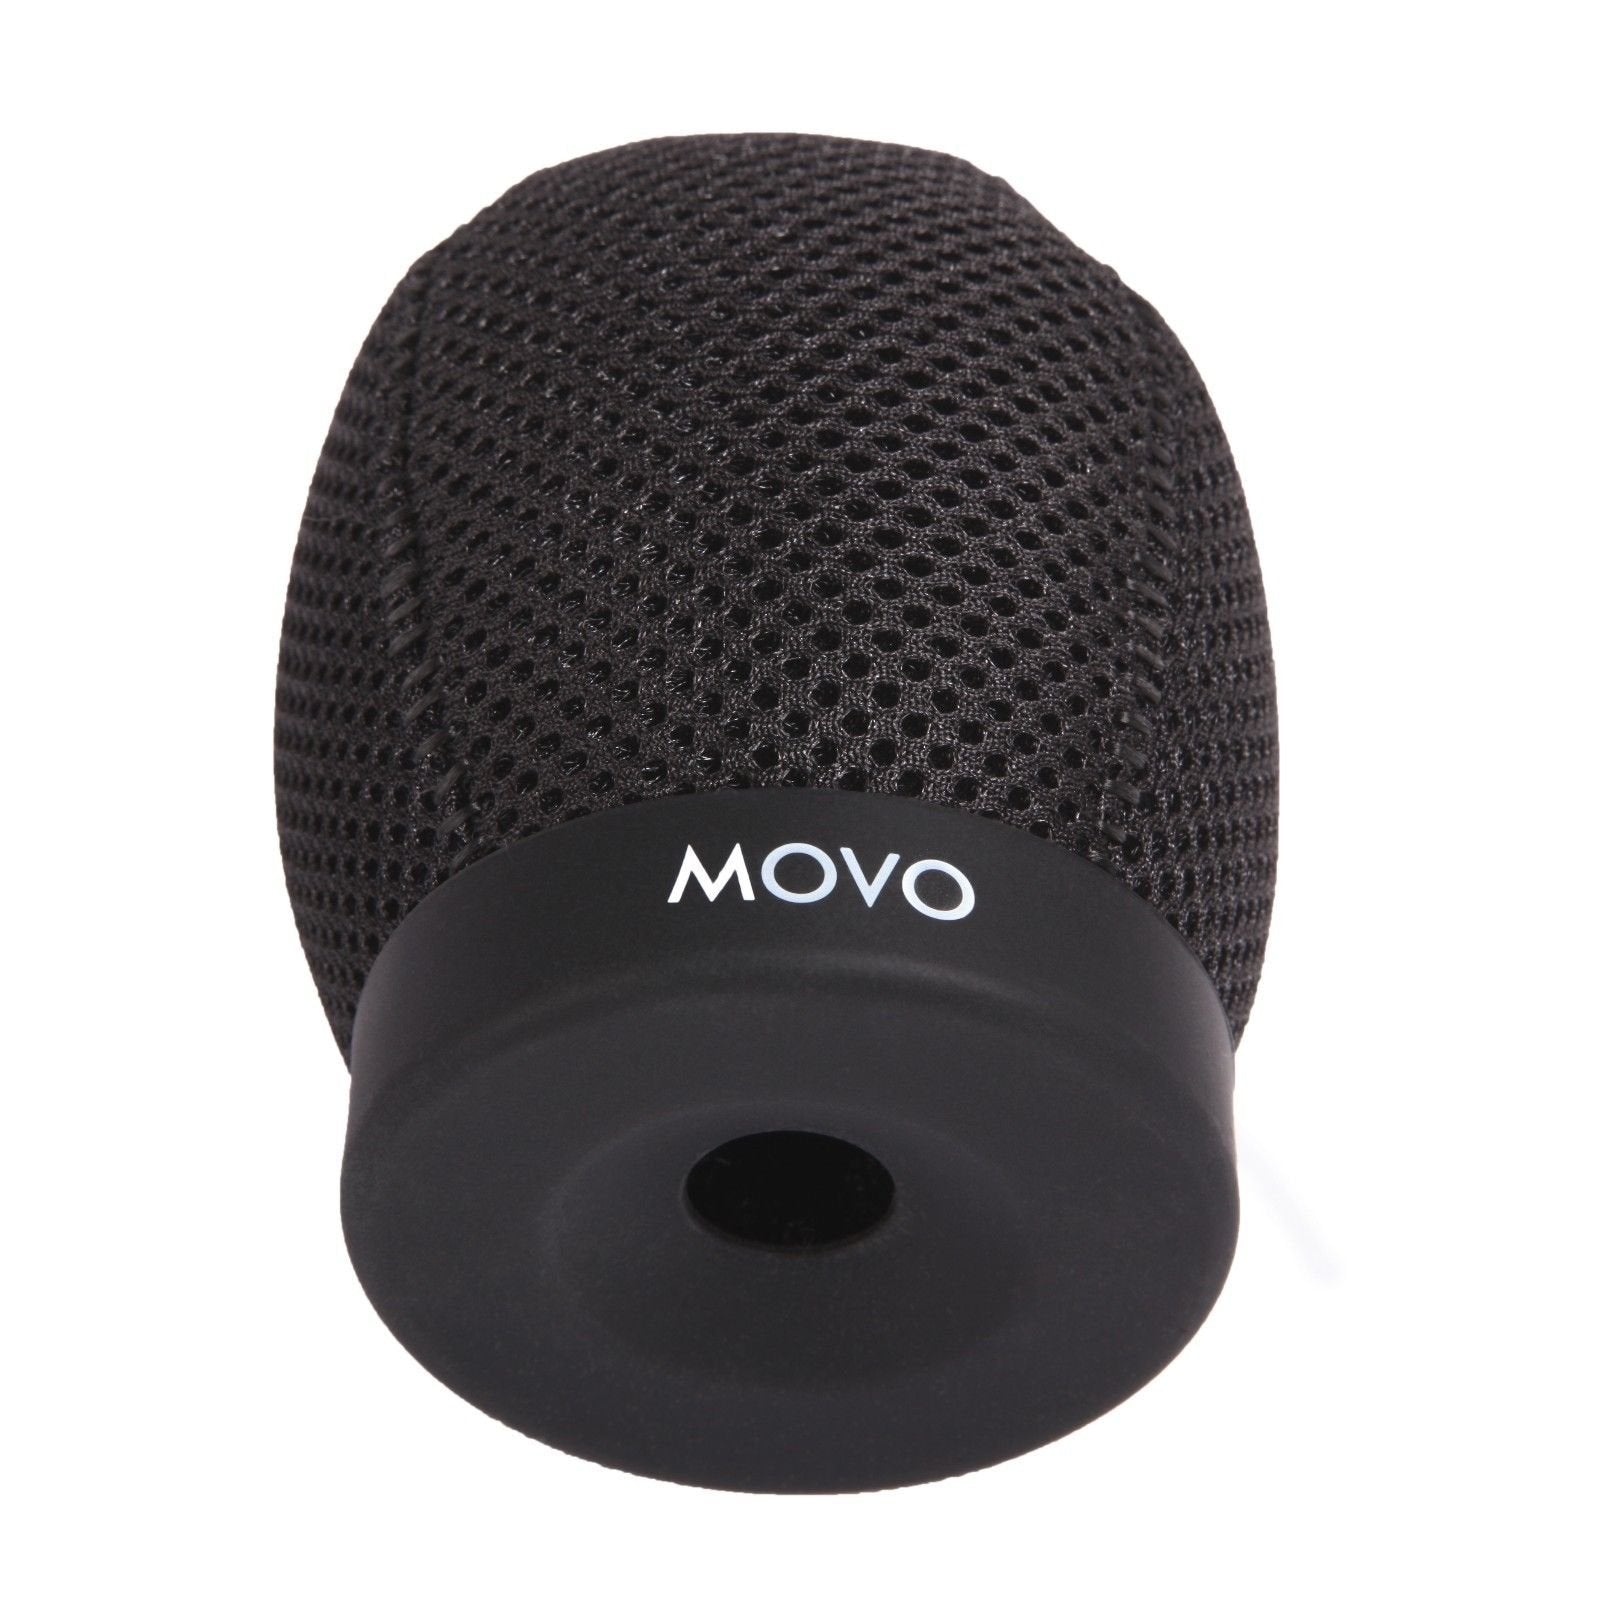 Movo WST50 Professional Premium Quality Ballistic Nylon Windscreen with Acoustic Foam Technology for Shotgun Microphones up to 3cm Long  - Like New